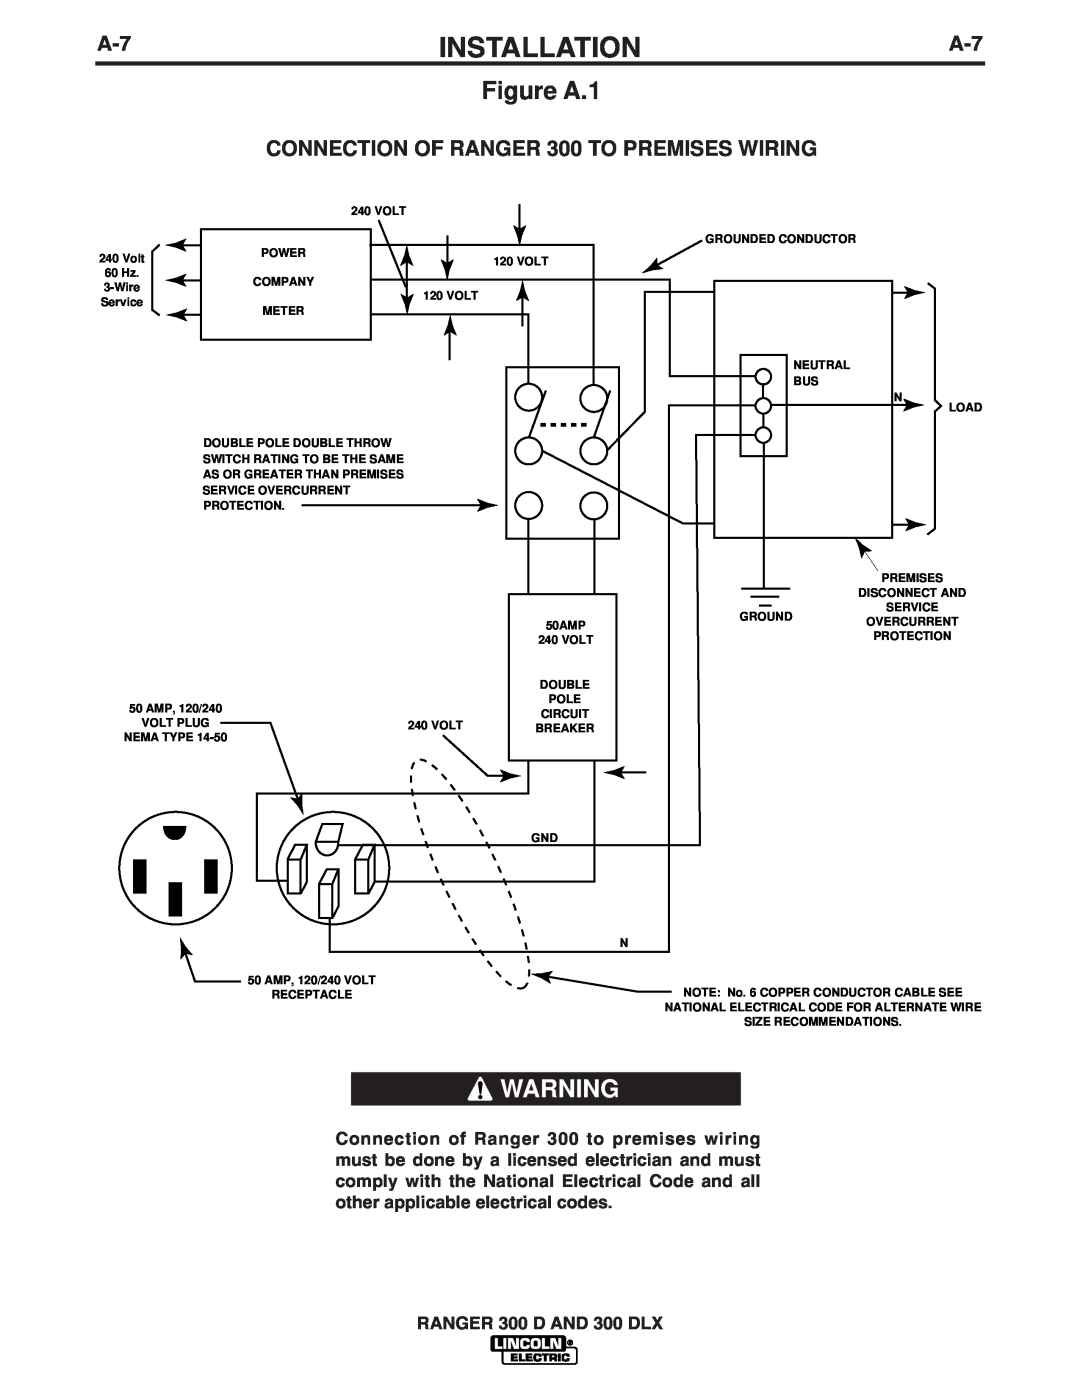 Lincoln Electric 300 DLX manual Figure A.1, CONNECTION OF RANGER 300 TO PREMISES WIRING, Installation 